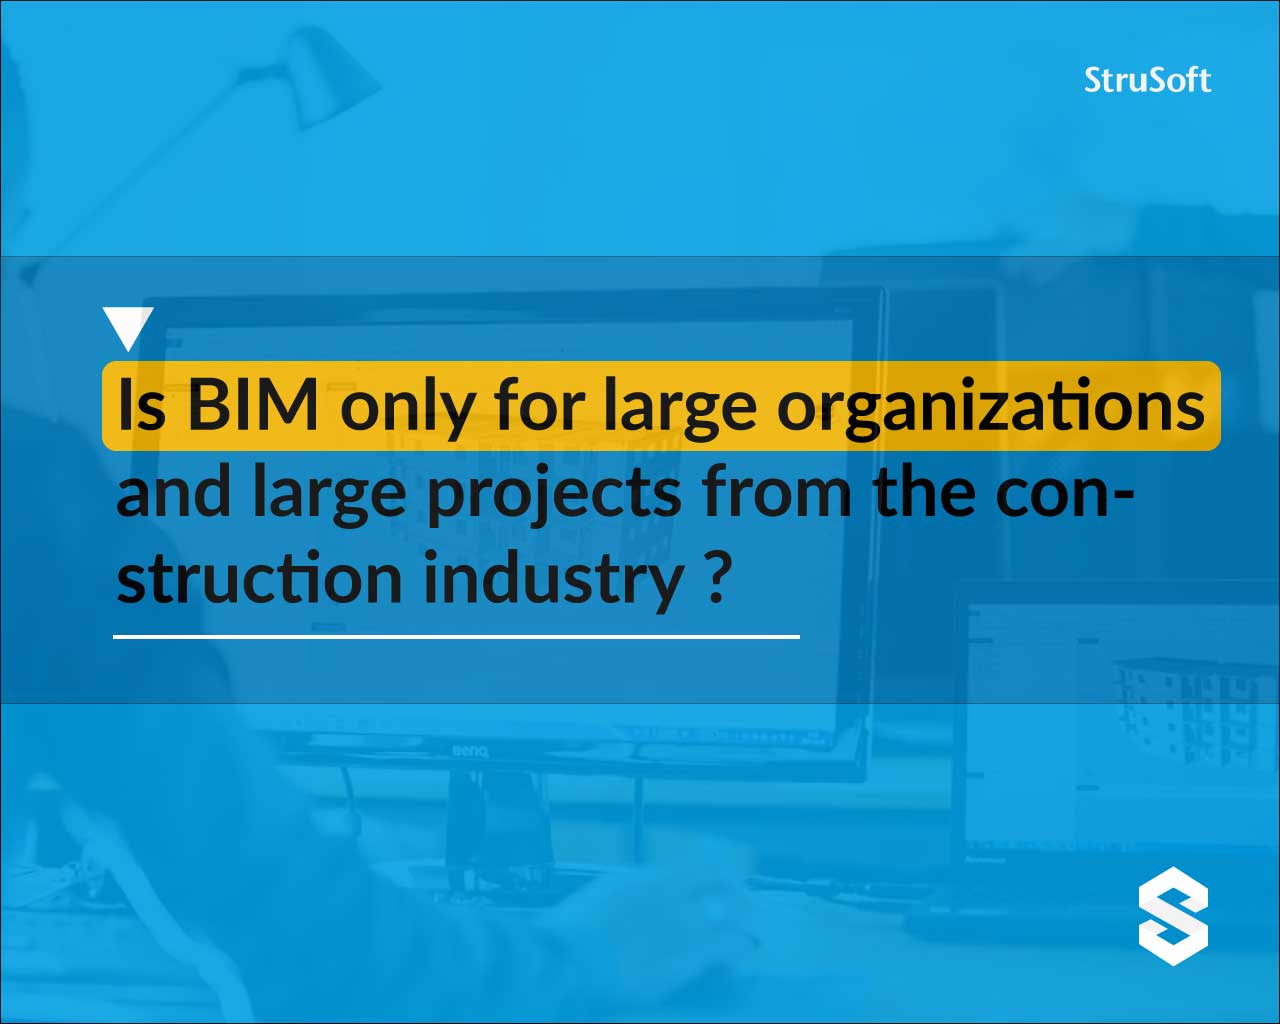 Is BIM only for large organizations and large projects from the construction industry 1